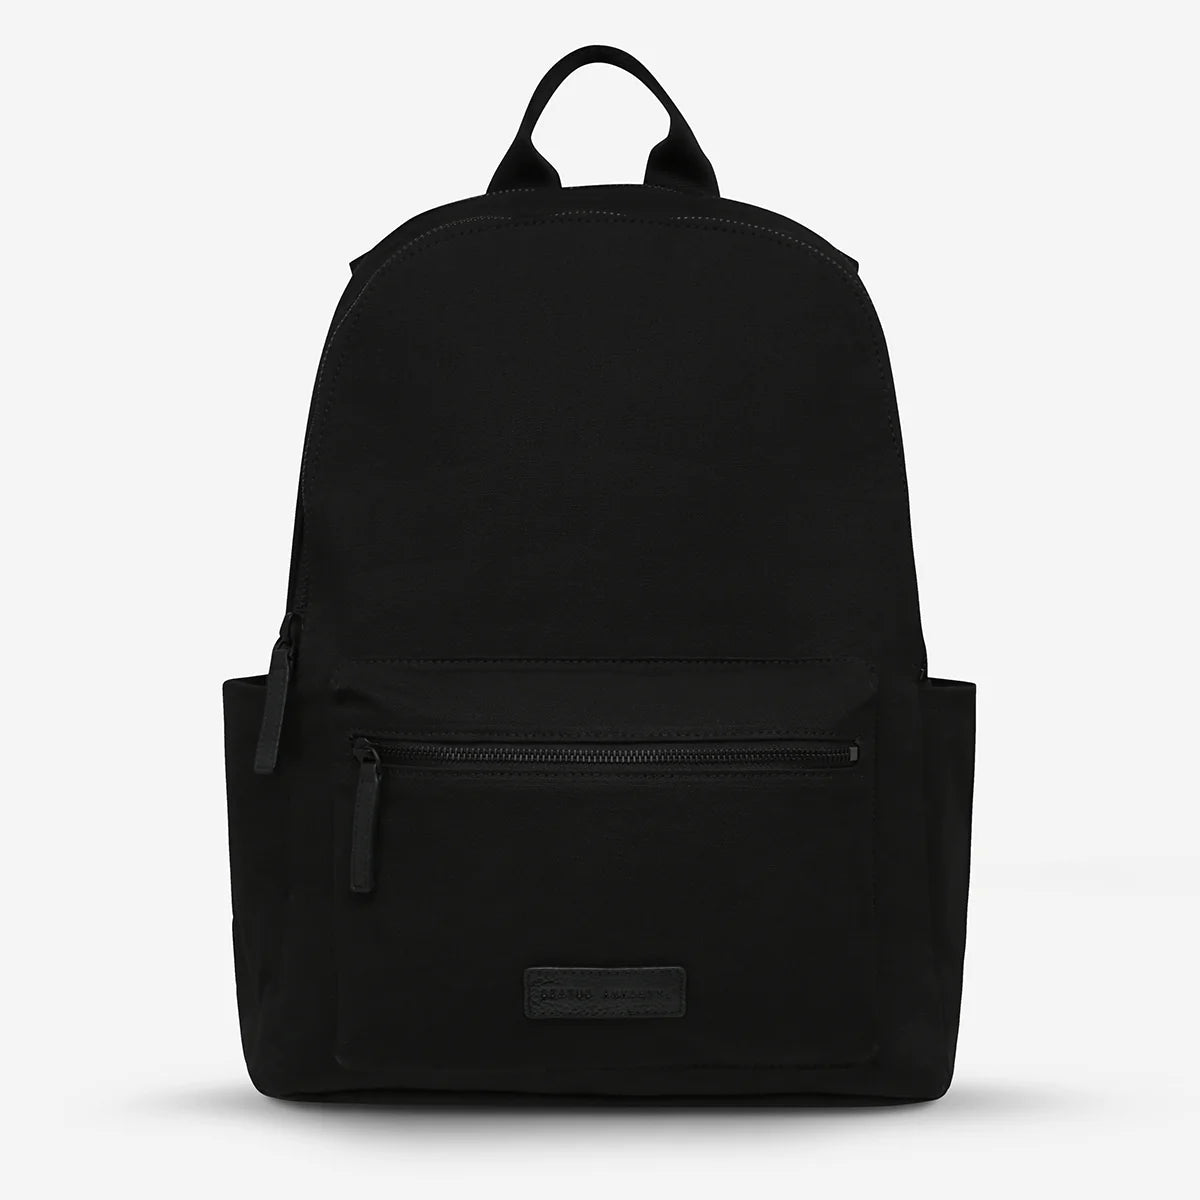 Good Kid Laptop Backpack - Stylish and Practical